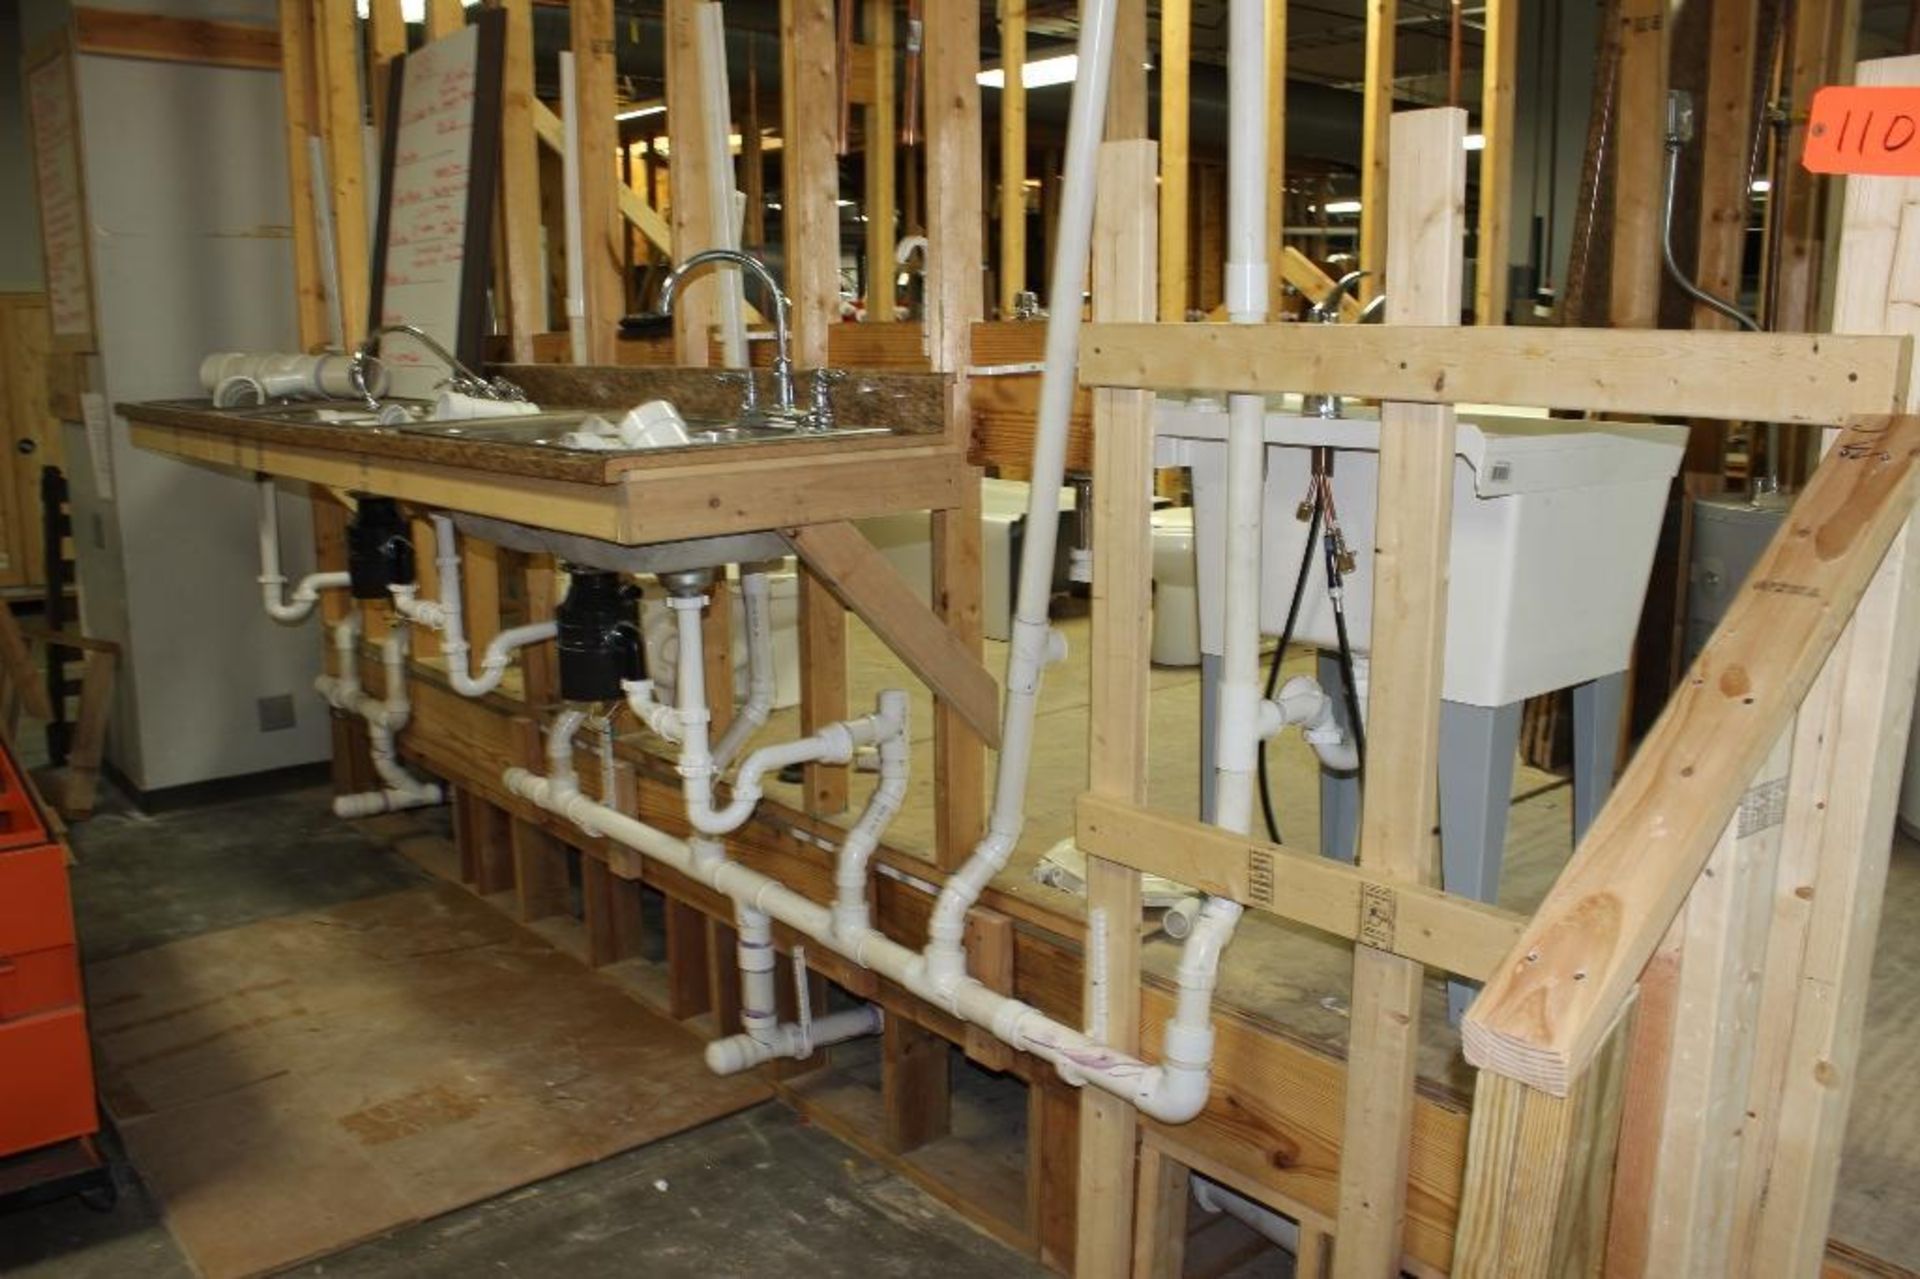 plumbing mock up w/plumbing fixtures does not include lots 1106 and 1105 - Image 4 of 4